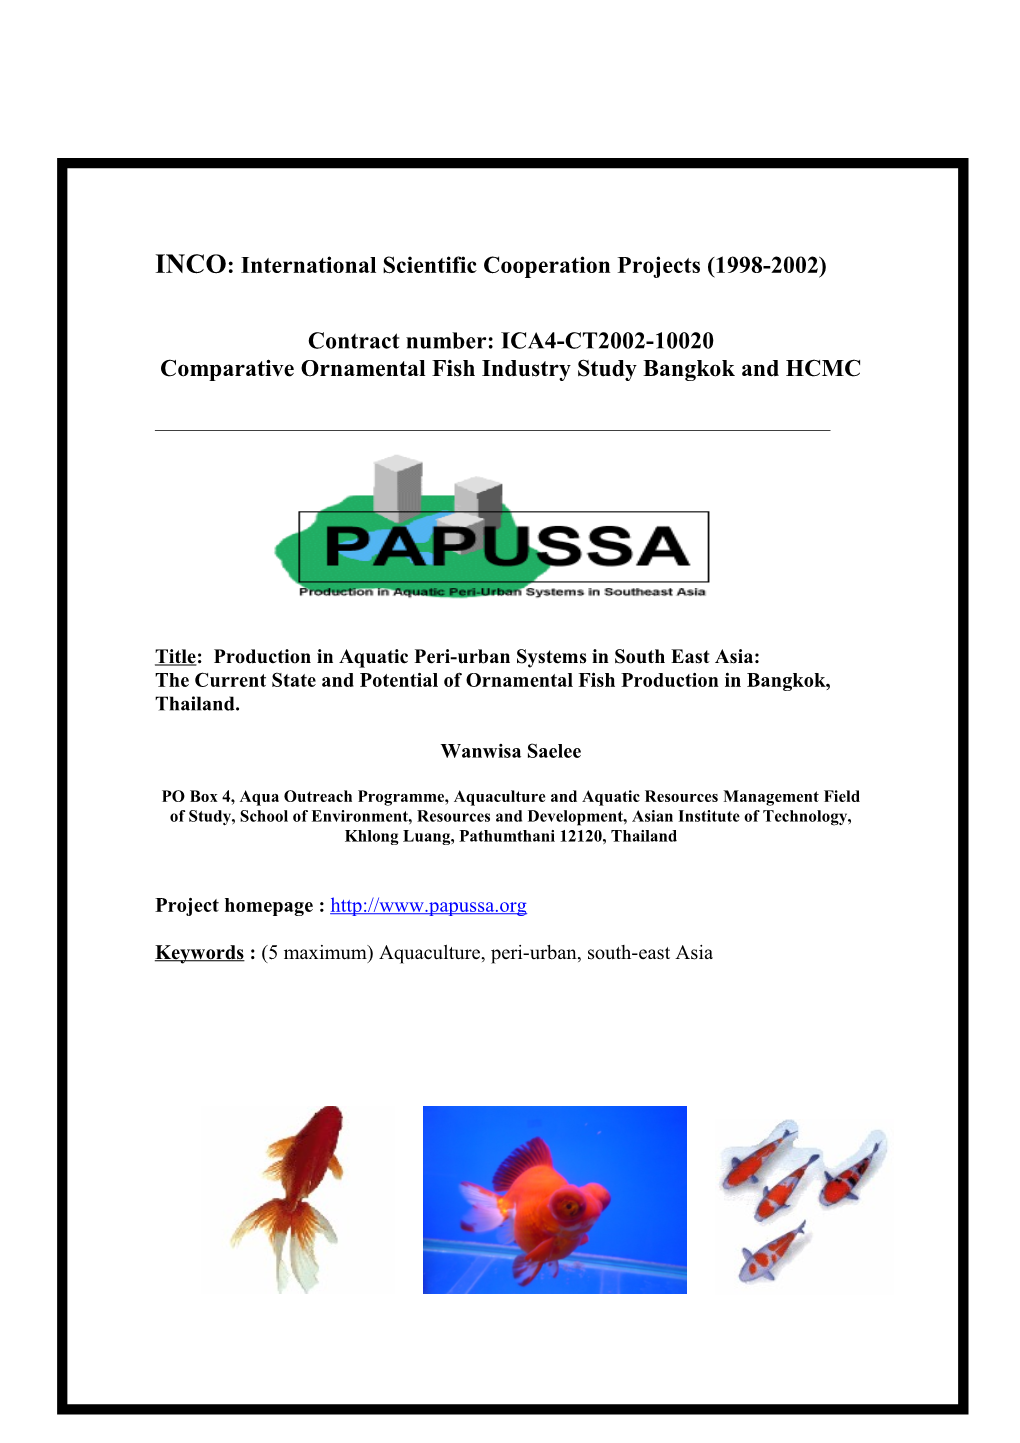 INCO: International Scientific Cooperation Projects (1998-2002)